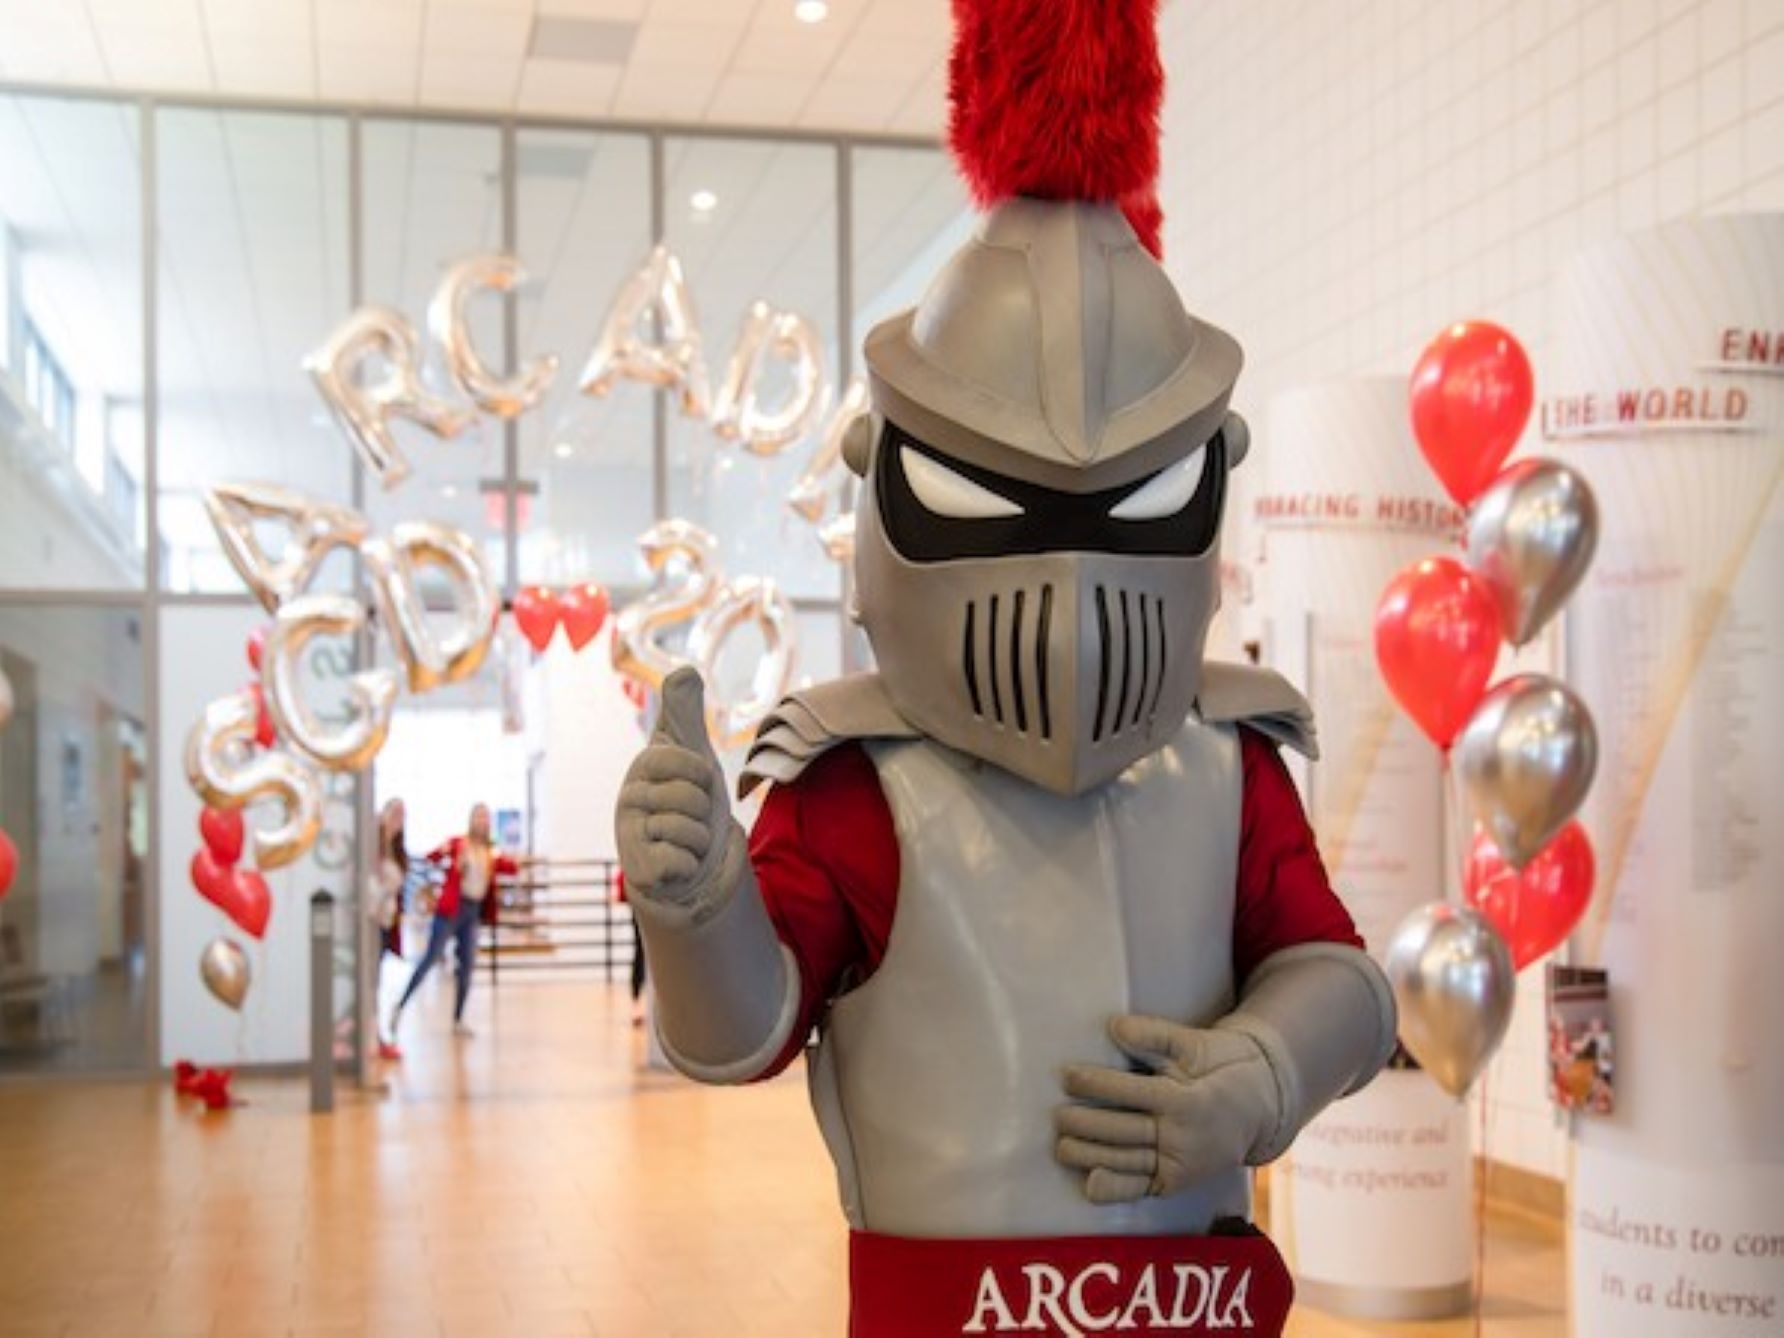 The Knight mascot at Scarlet and Grey Day.